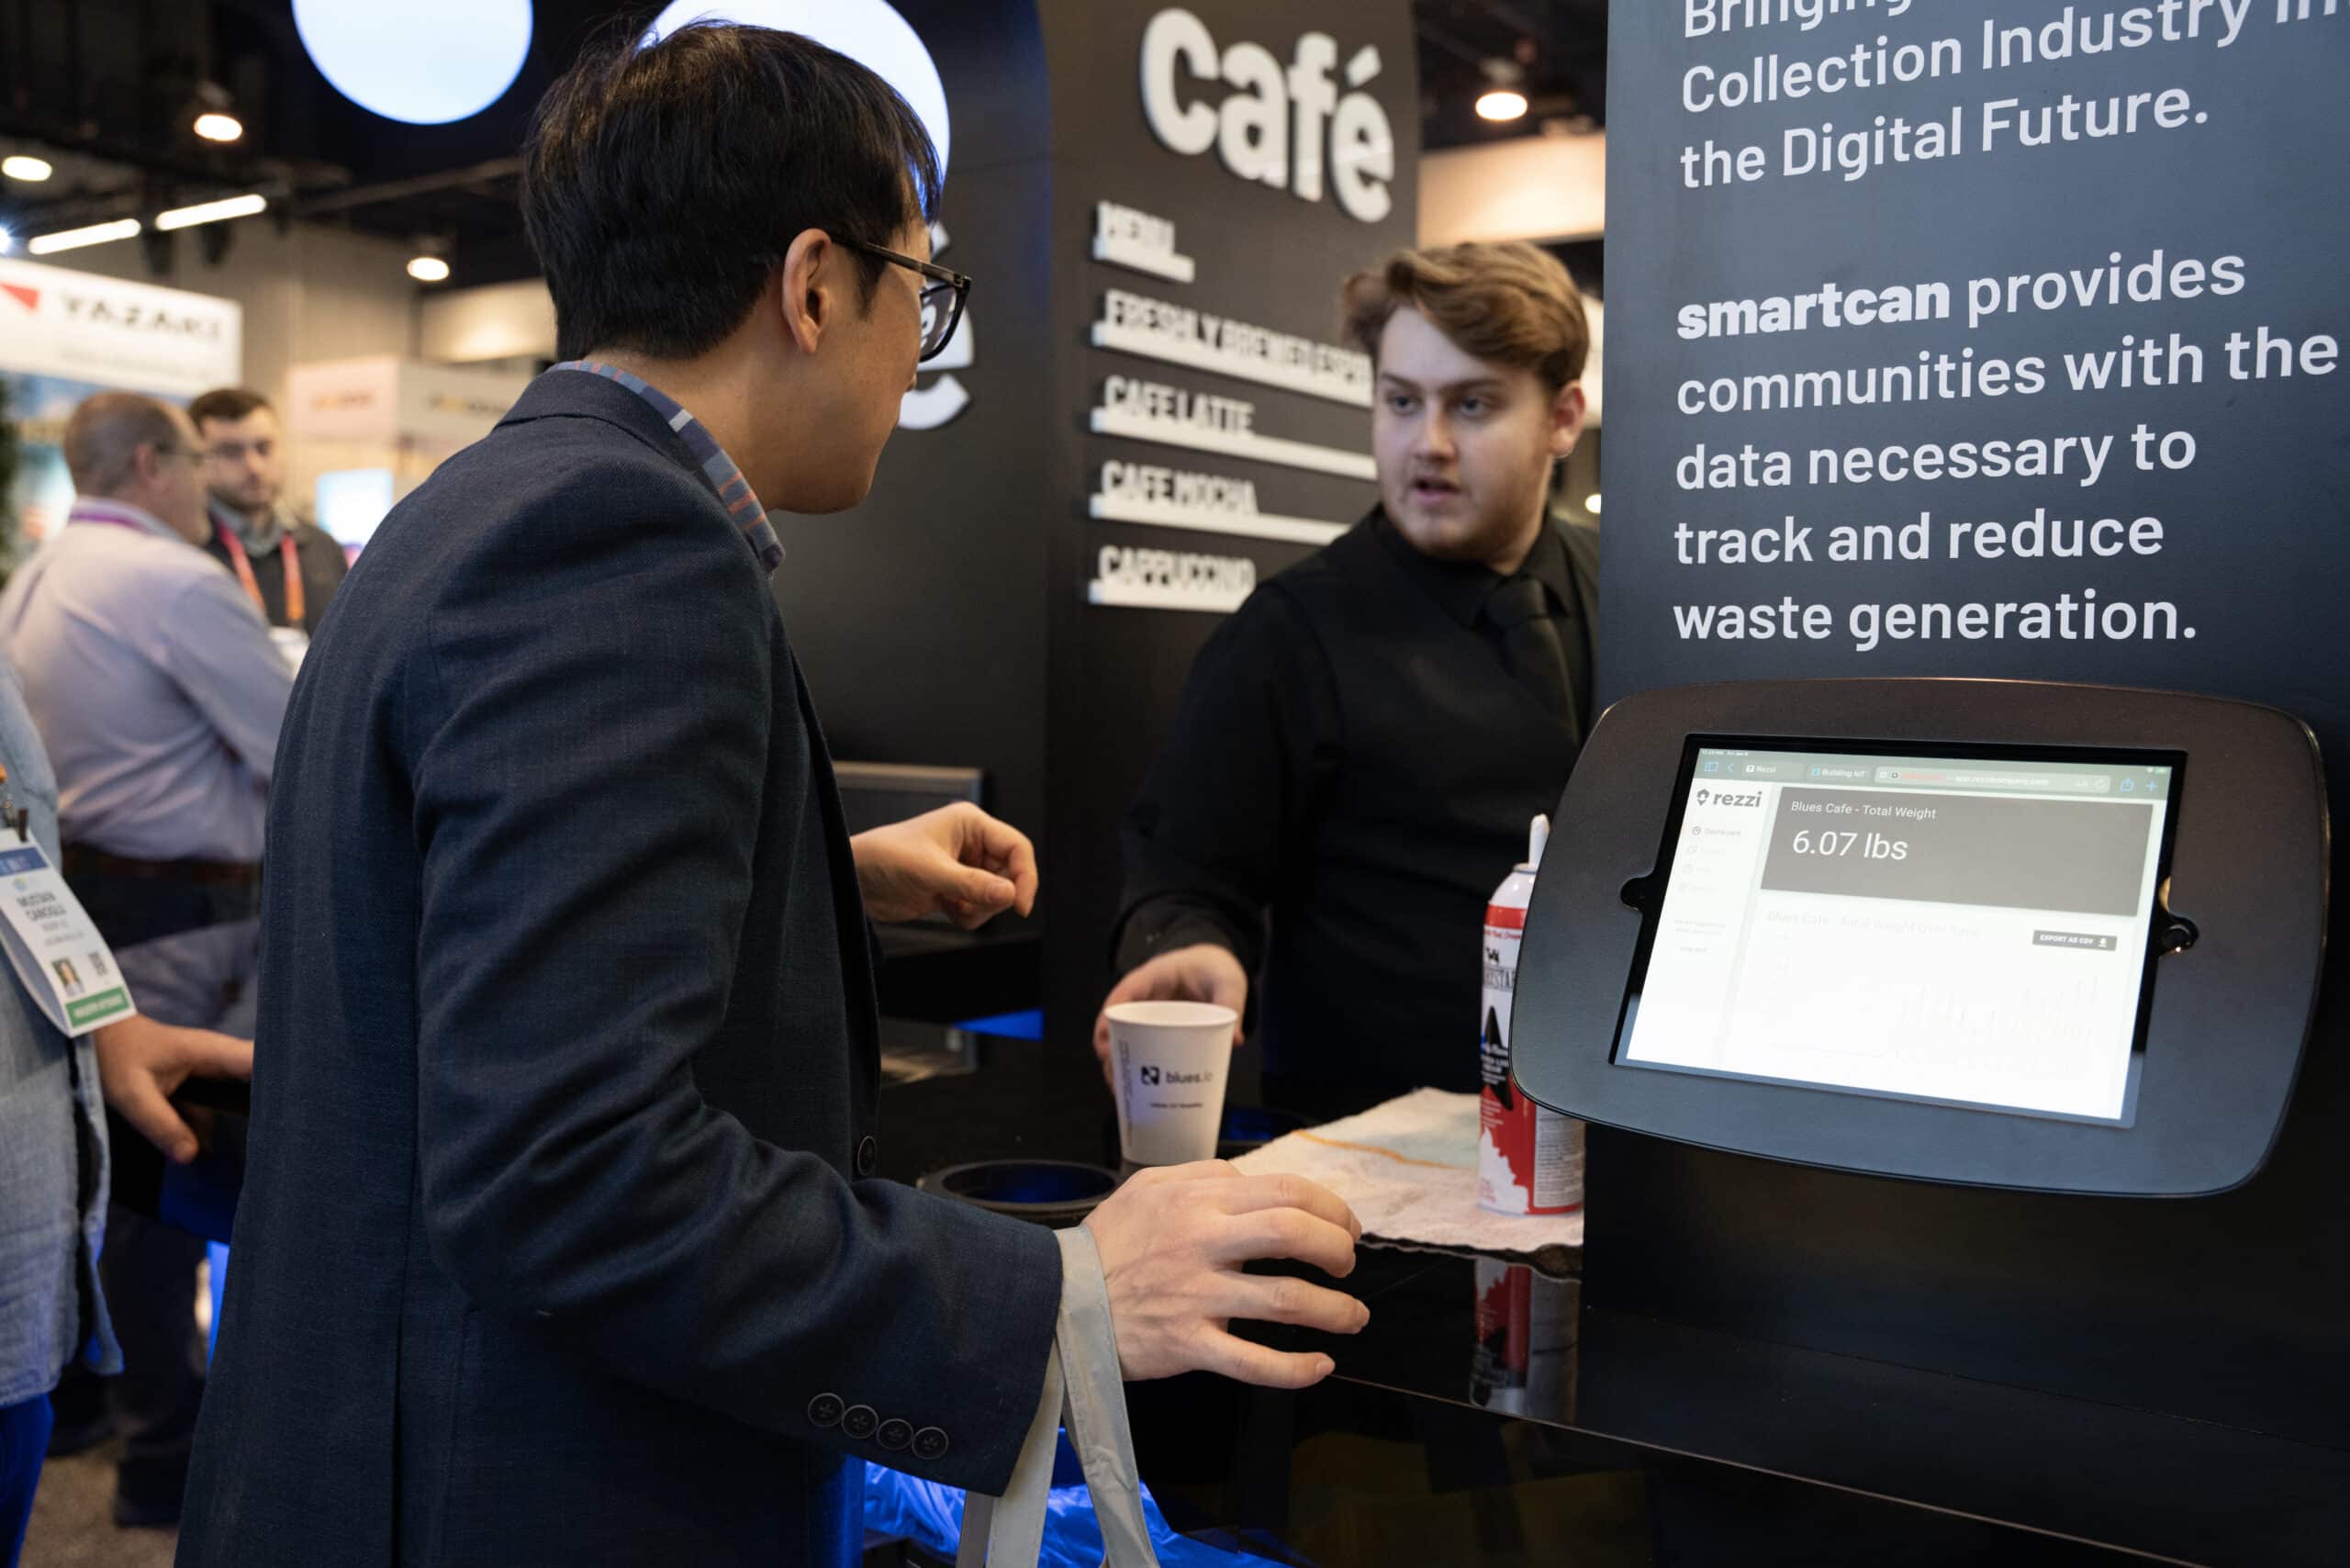 Barista serves coffee at Blues Café during CES 2023